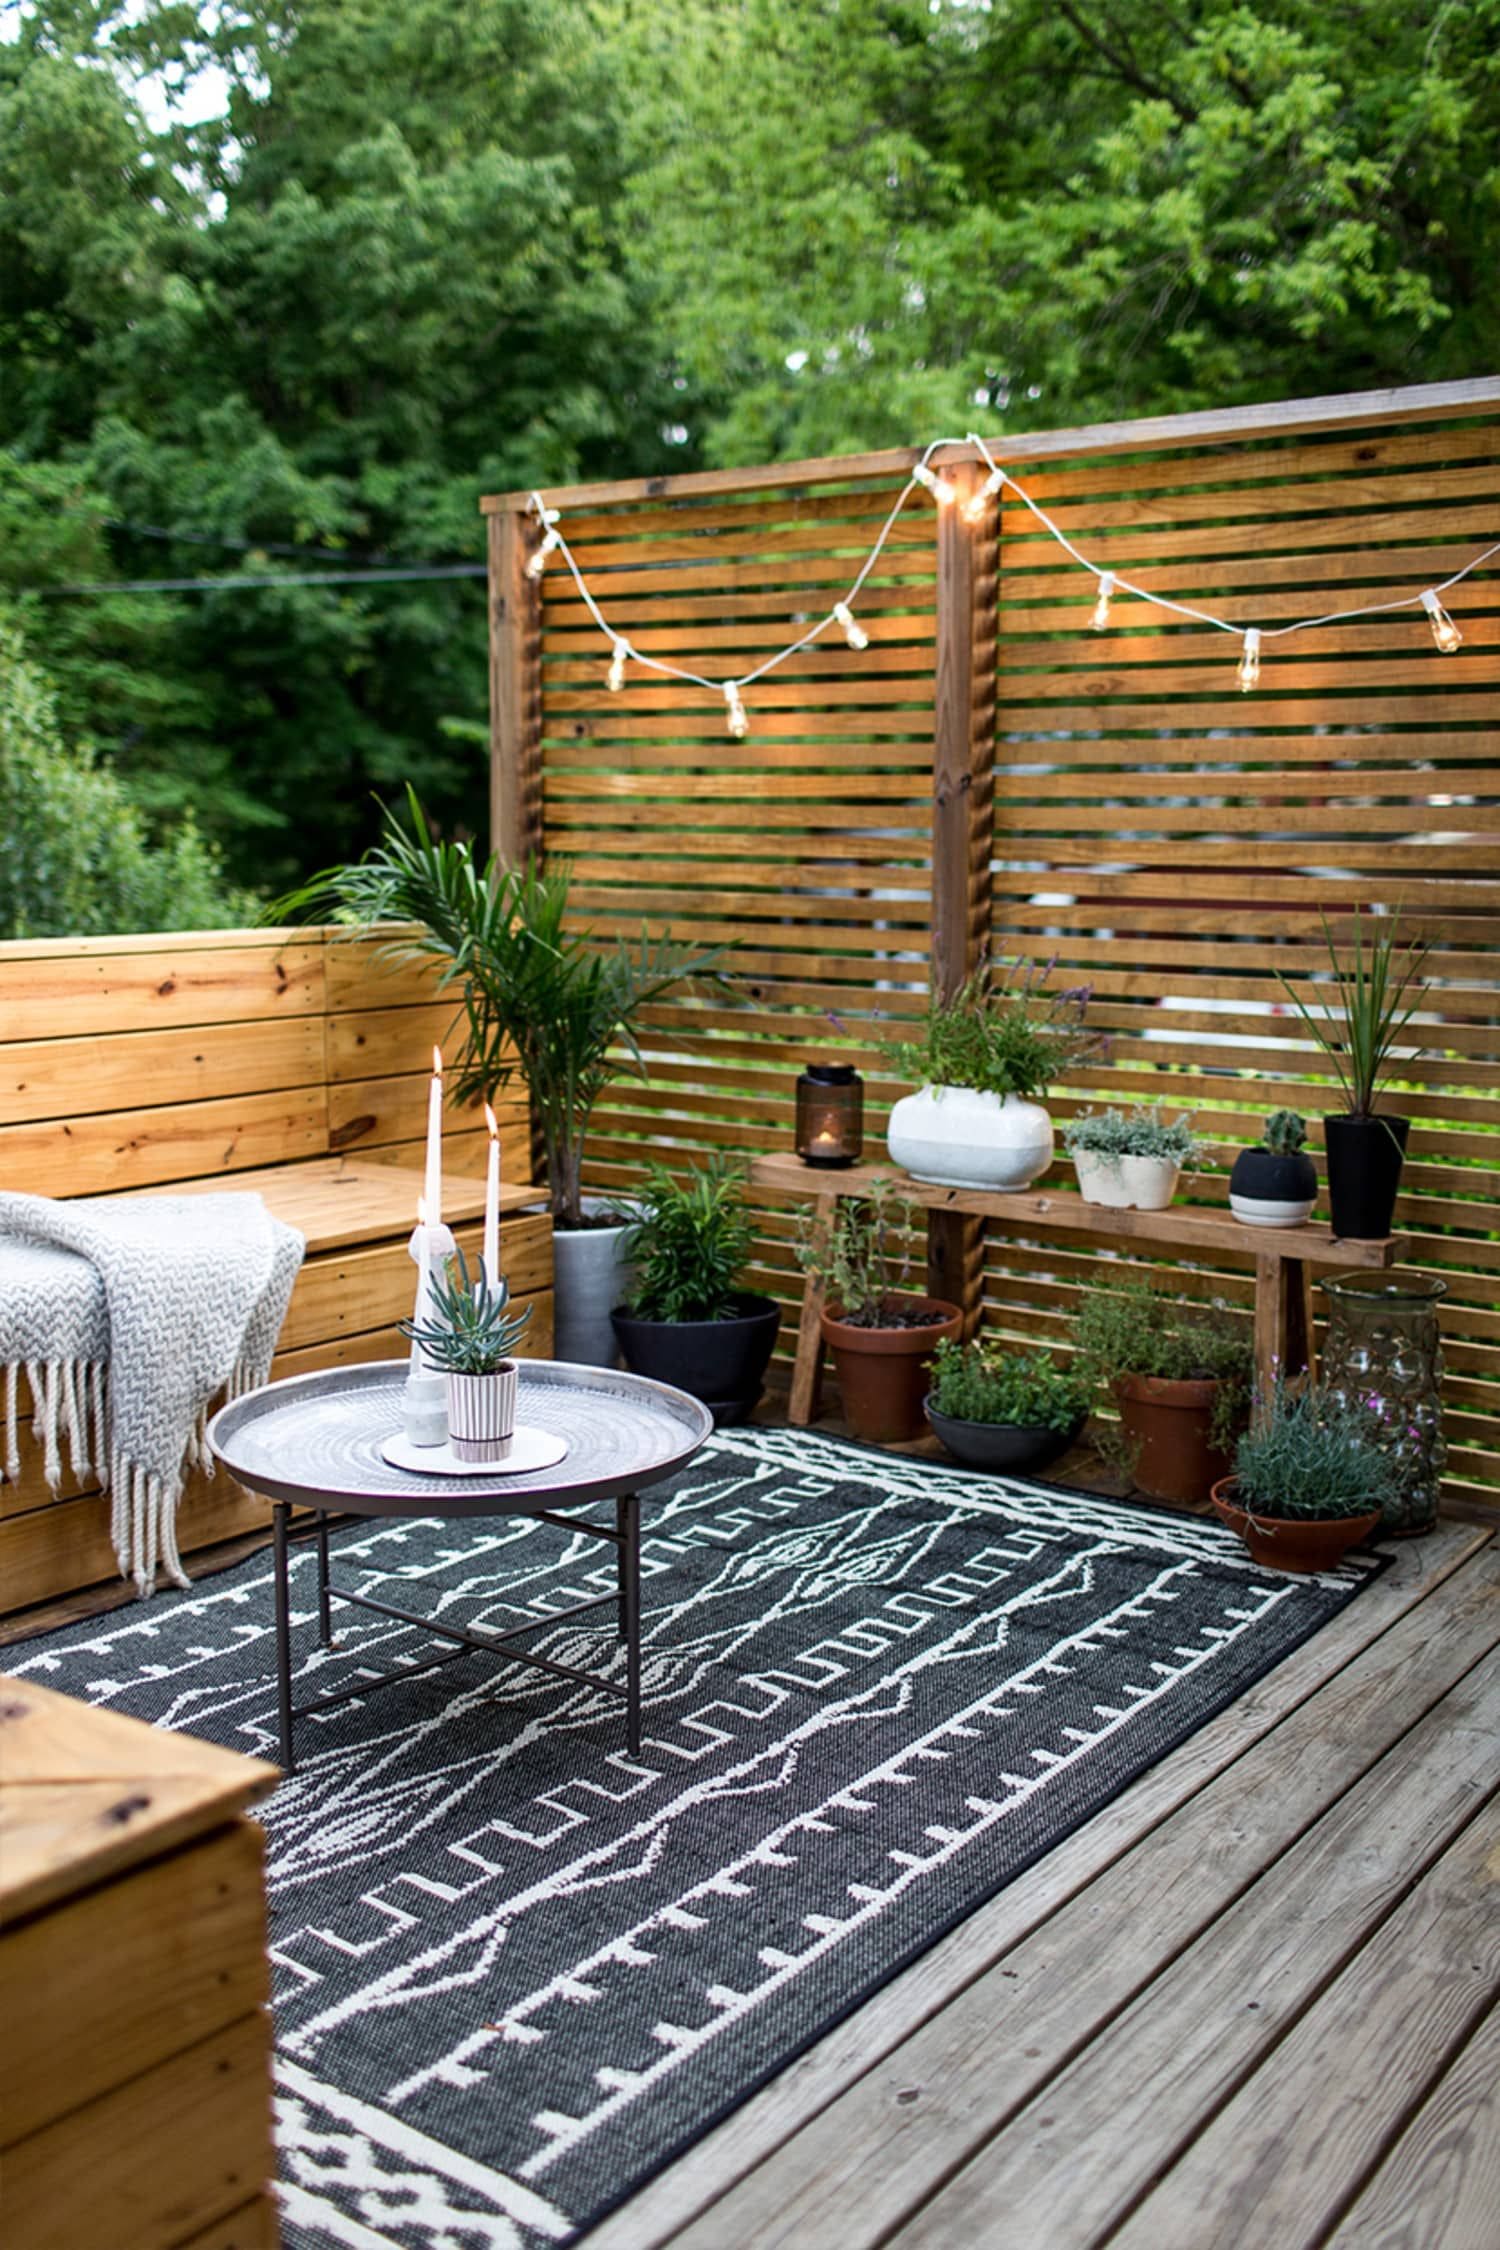 25 fabulous ideas to turn patios into inviting outdoor spaces - 75